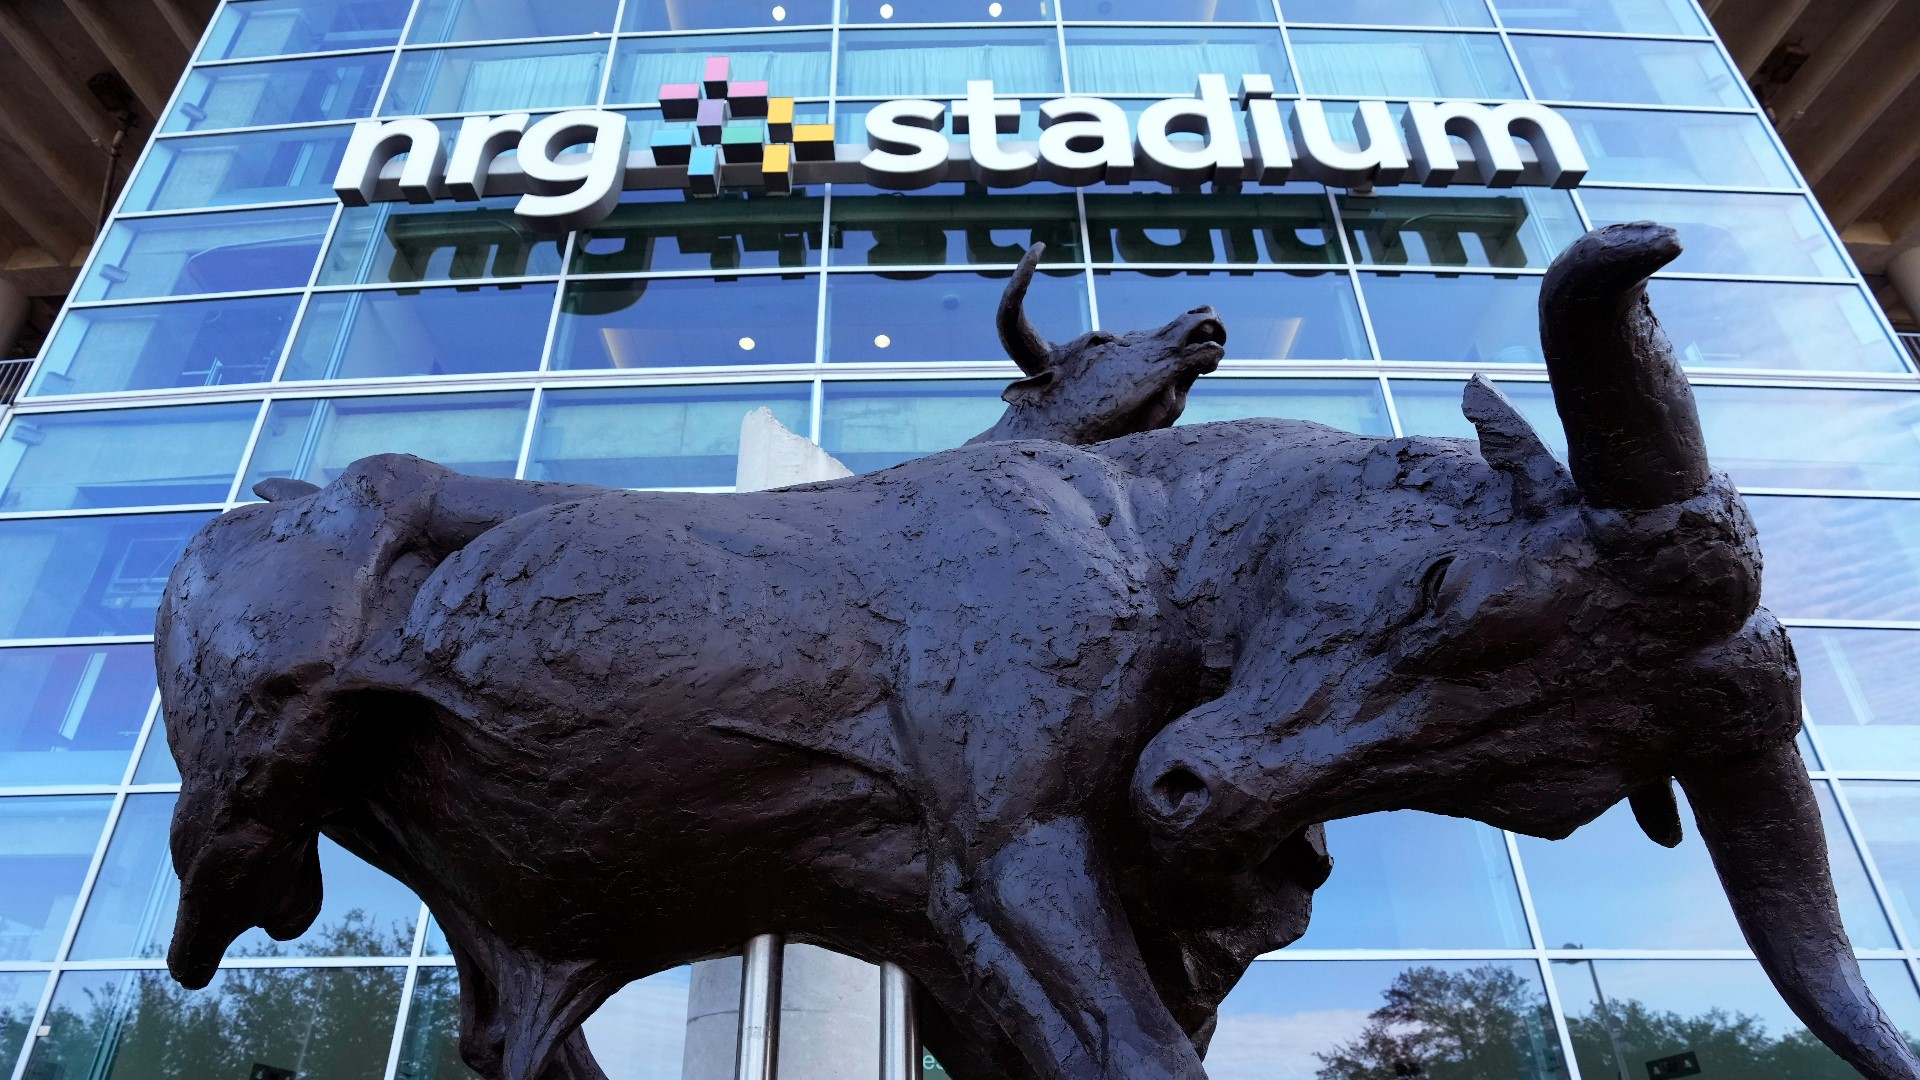 Houston is now less than three years away from hosting matches for the 2026 FIFA World Cup. On Thursday, representatives dropped by for an onsite visit at NRG.